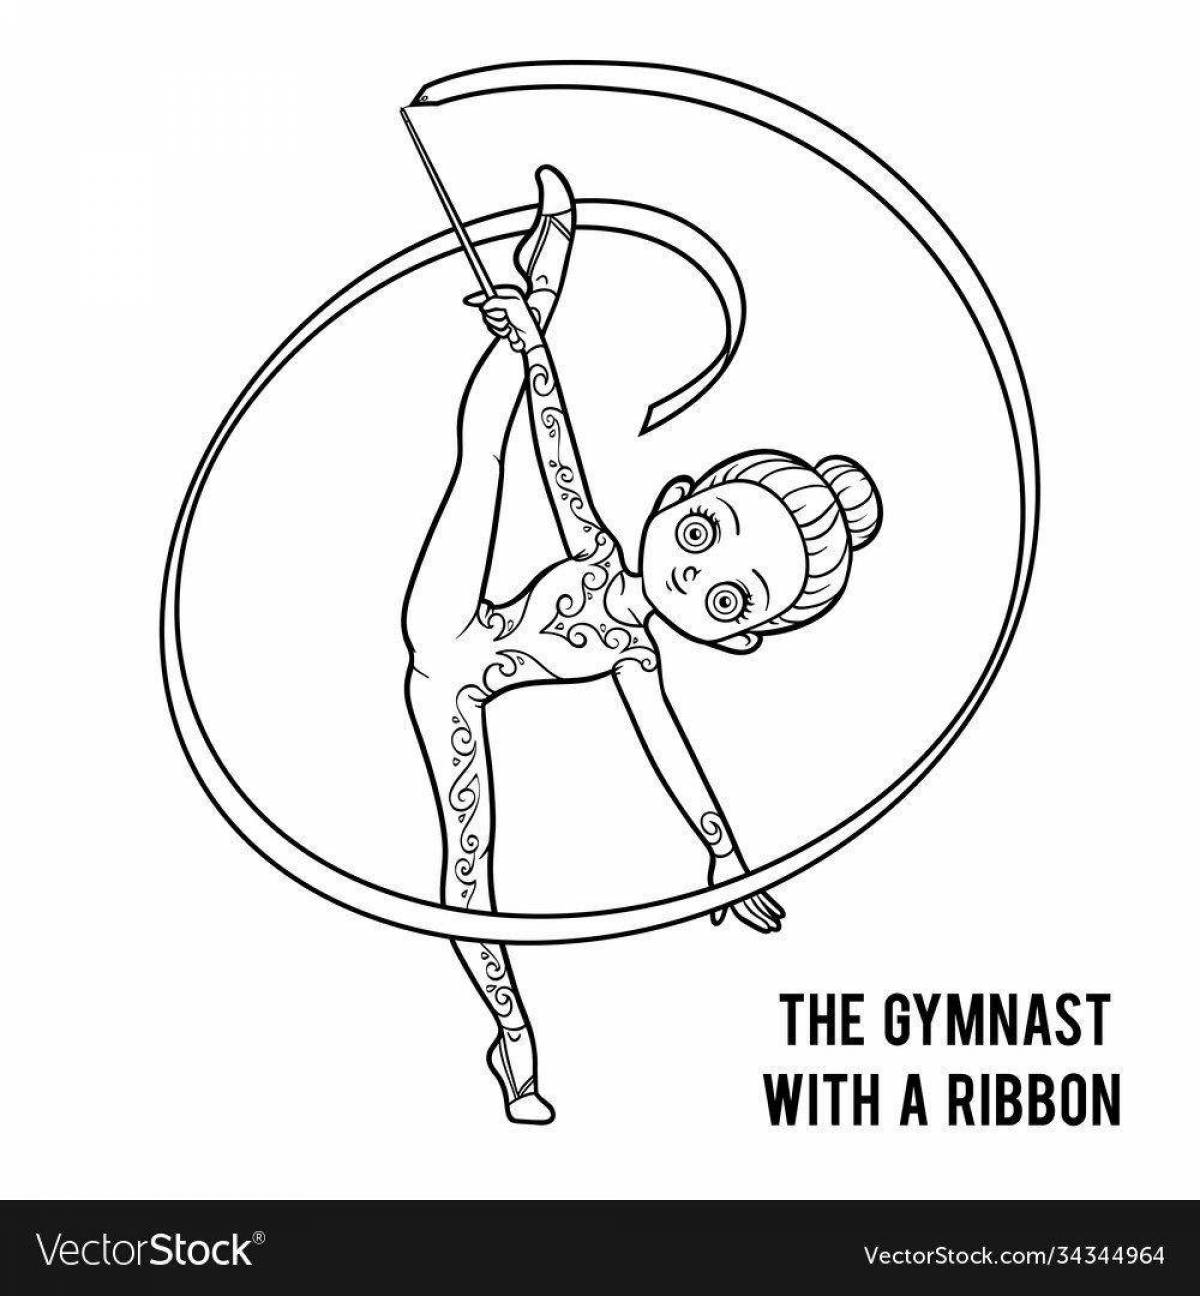 Awesome aerial gymnastics coloring page